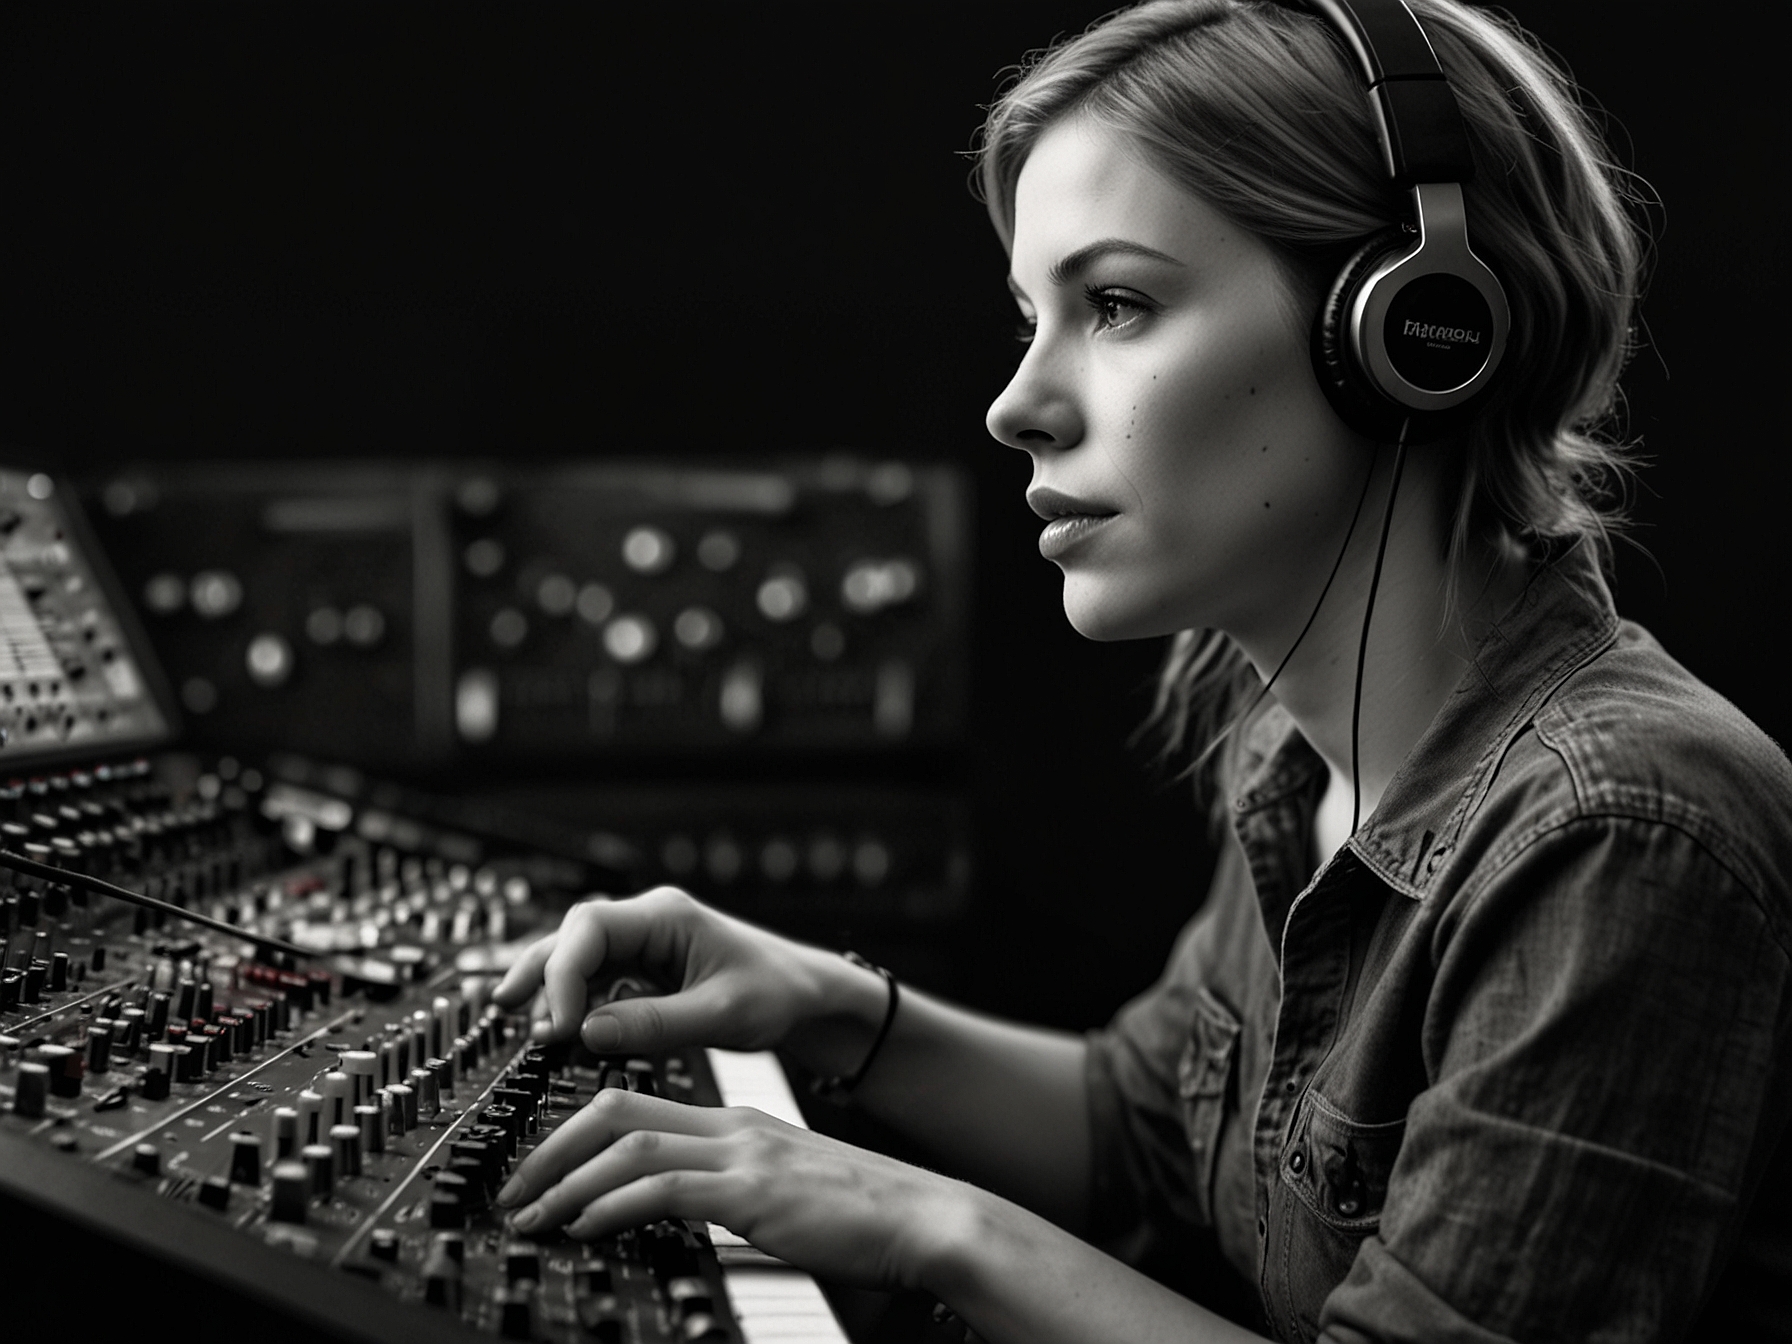 Close-up of Warner, deeply focused on a mixing console, highlighting the intricate technical aspects of music production she has embraced alongside her songwriting skills.